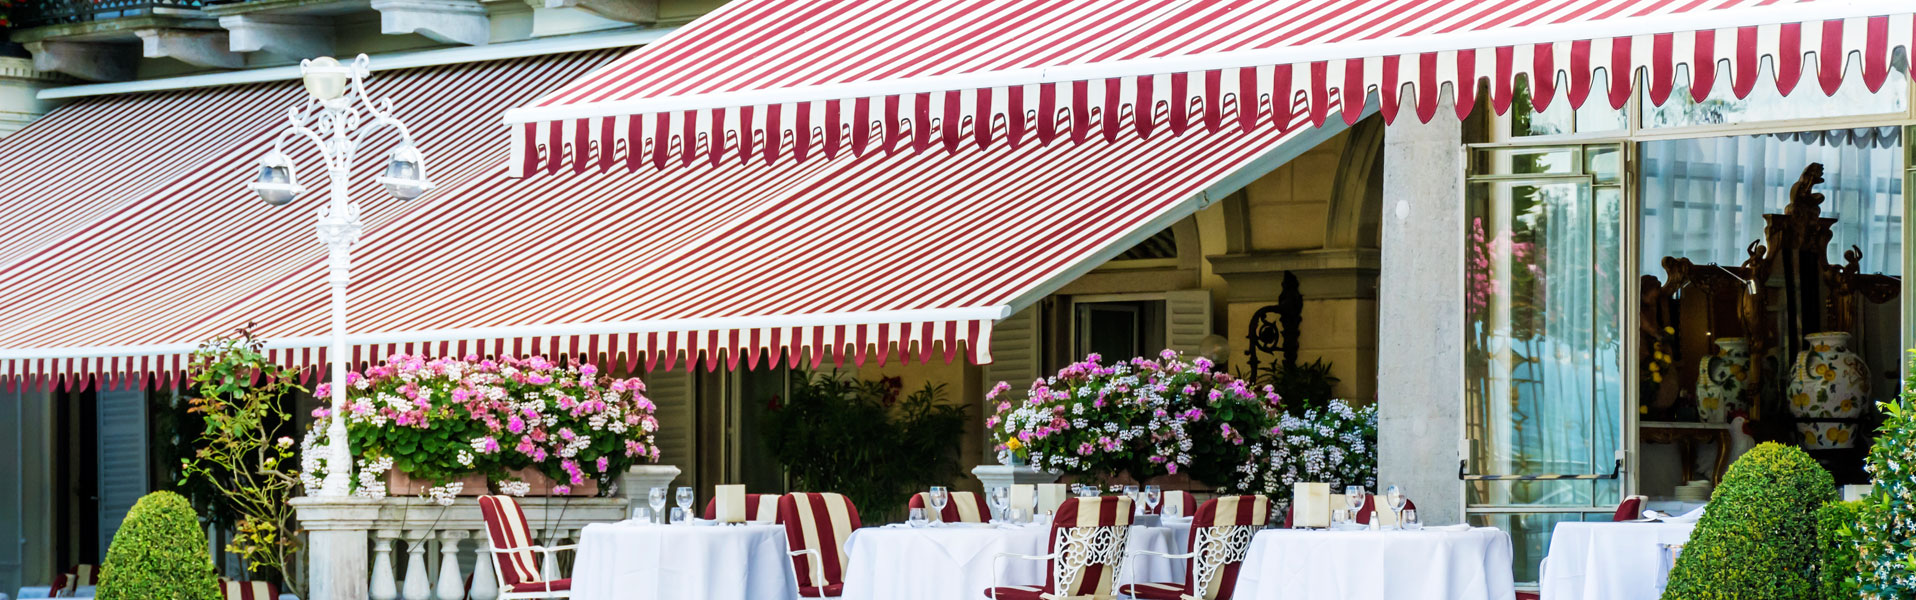 business awnings